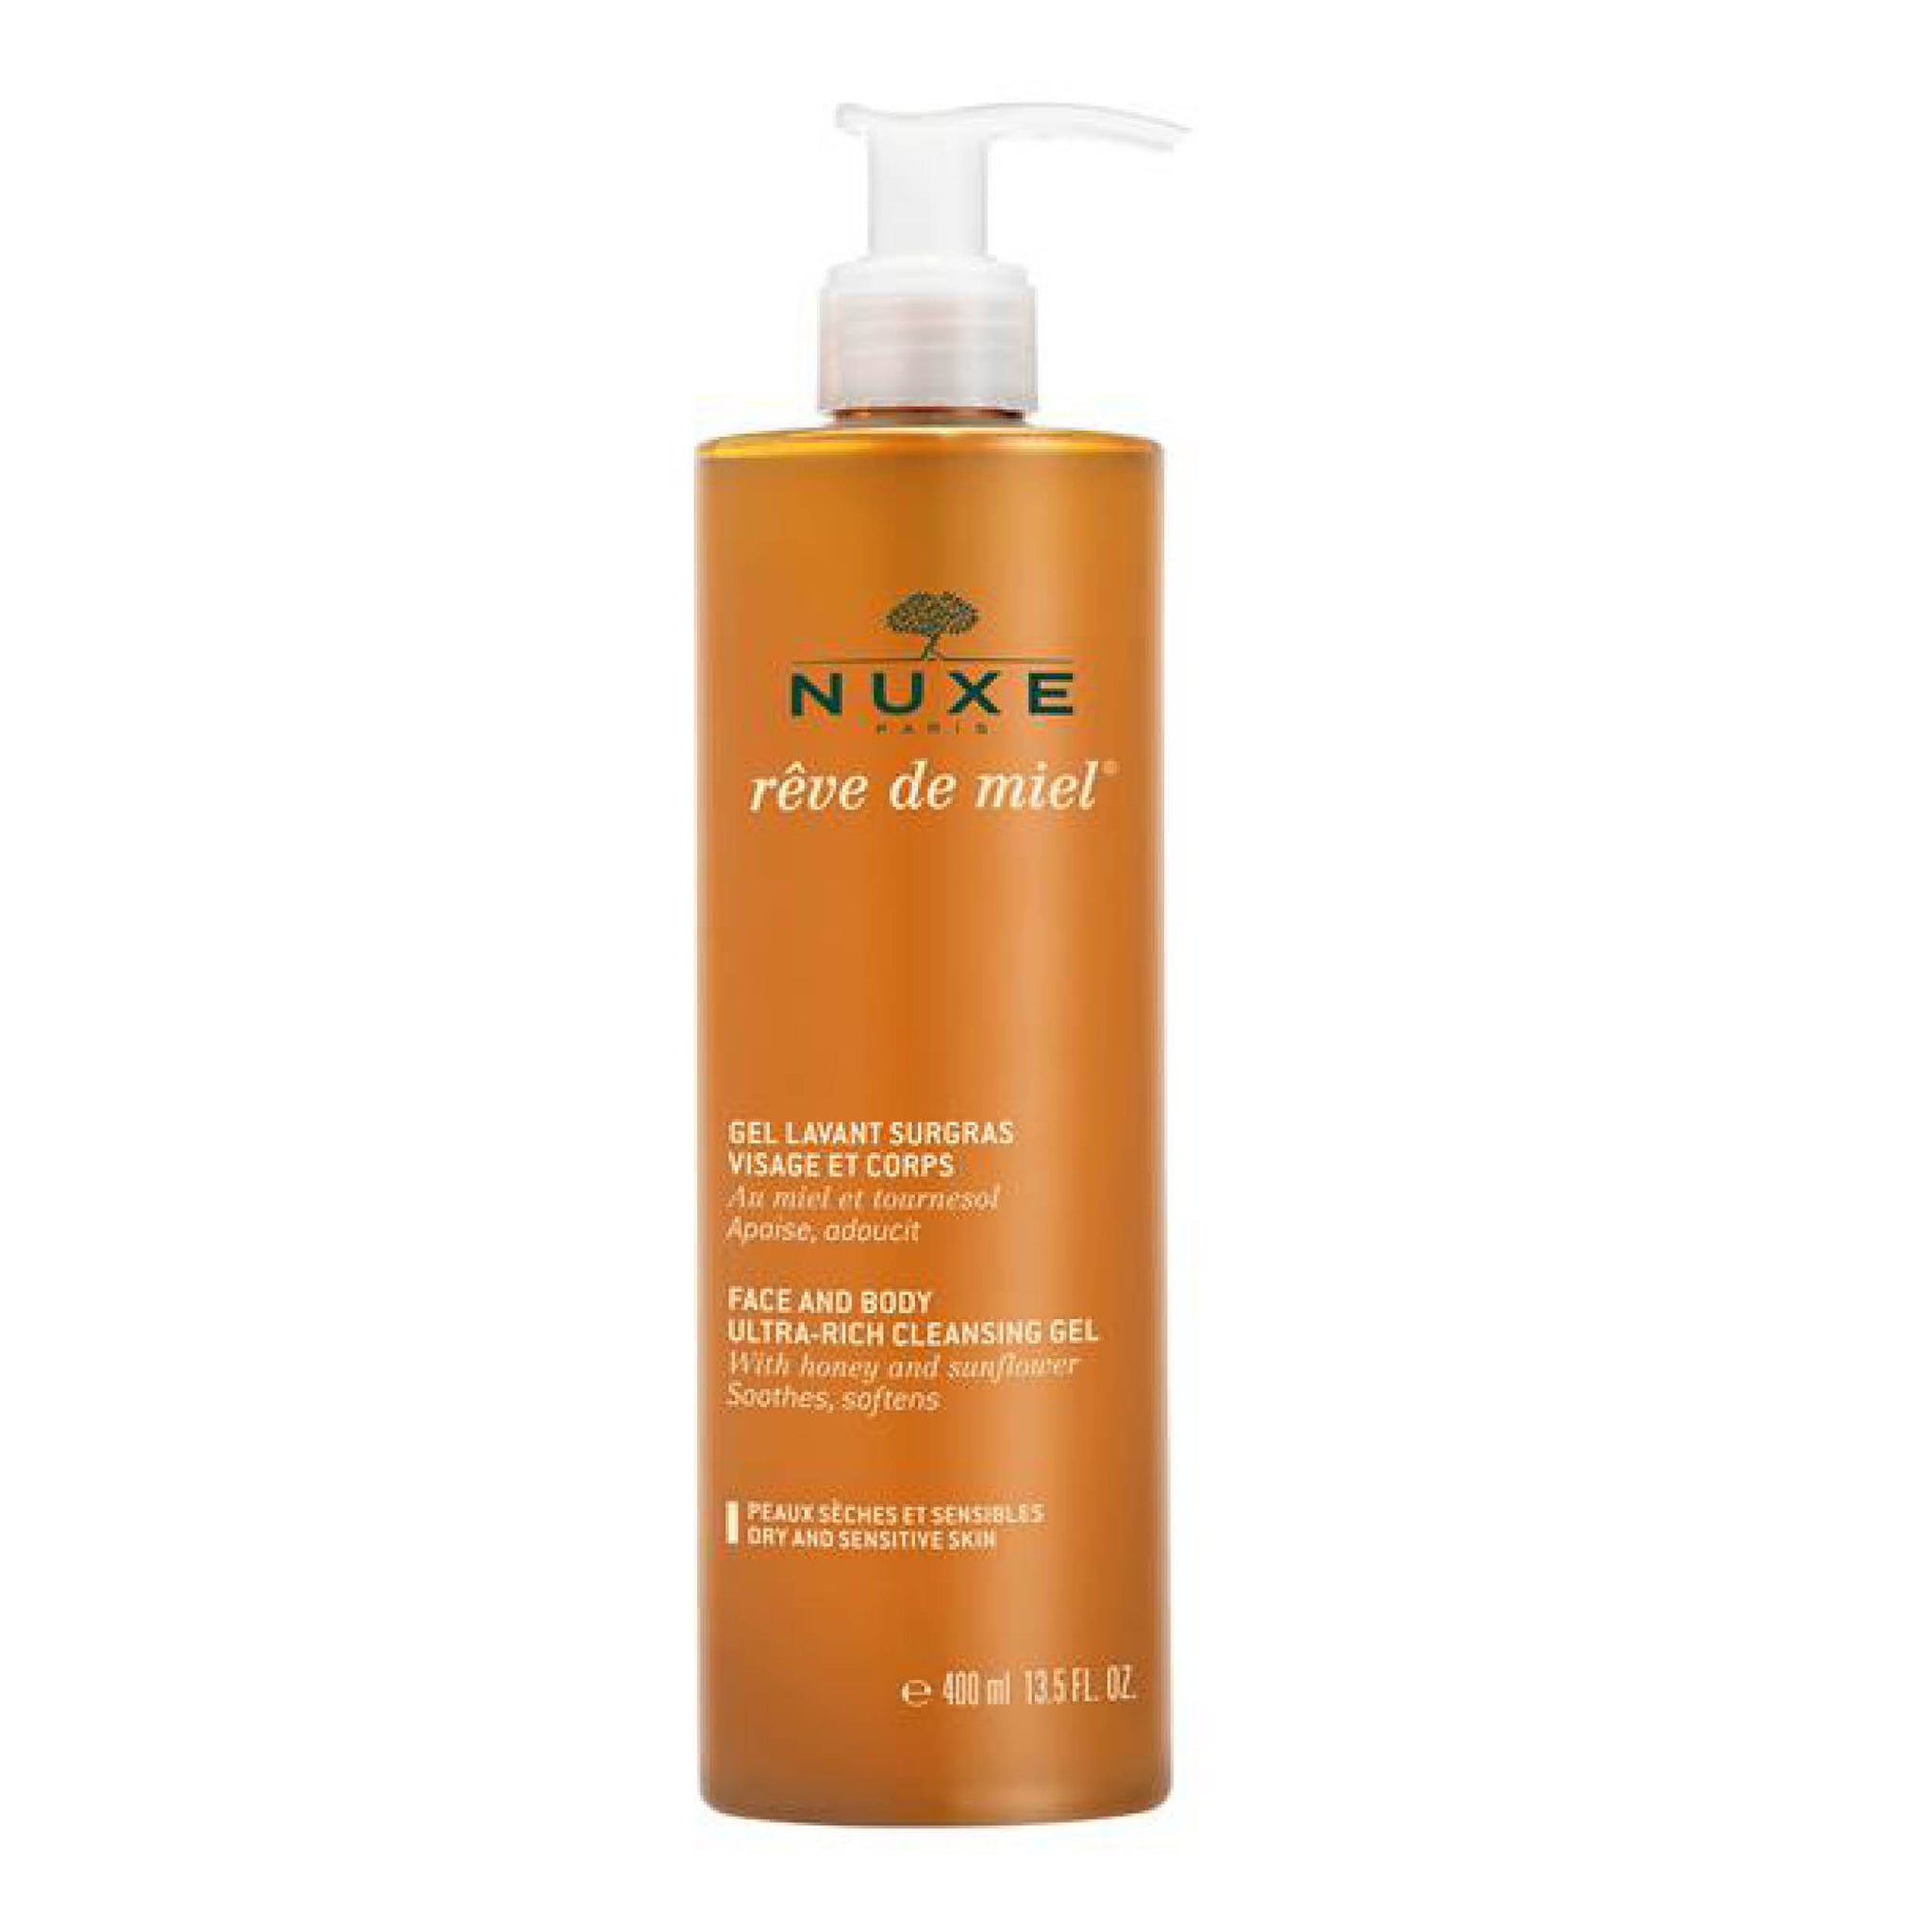 Nuxe Rêve de Miel Face and Body Ultra-rich Cleansing Gel